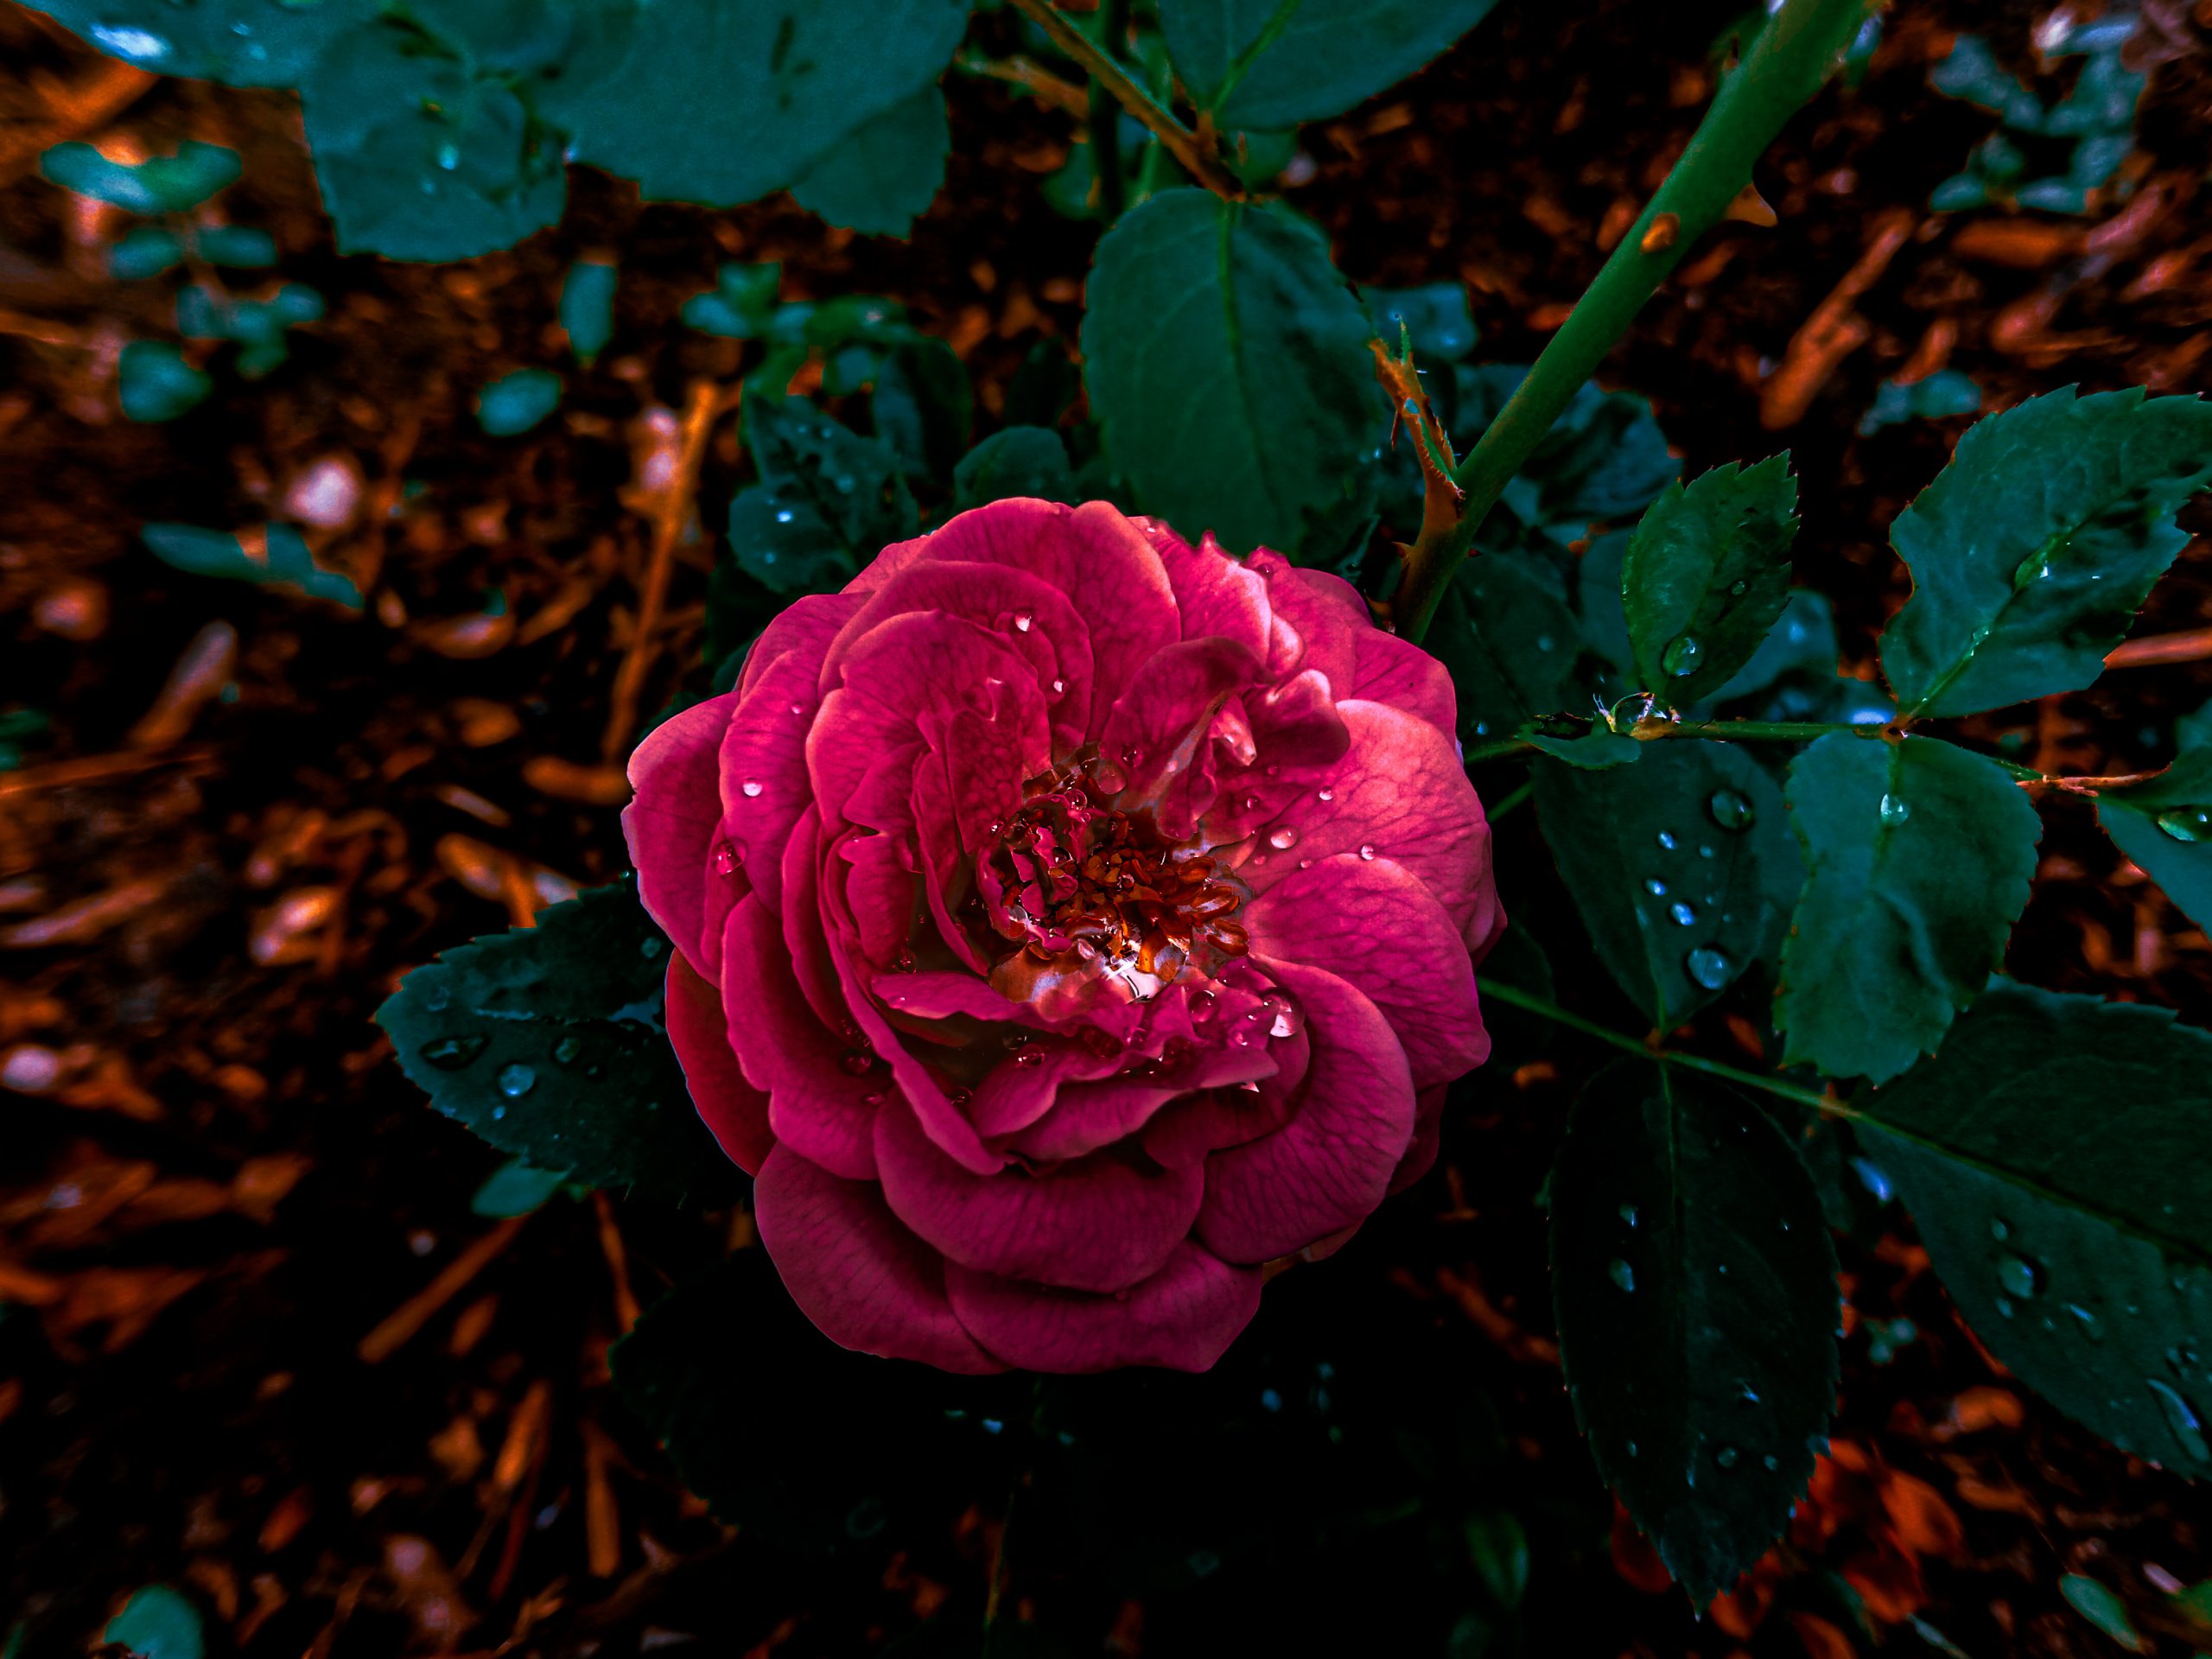 Moisture on a red rose